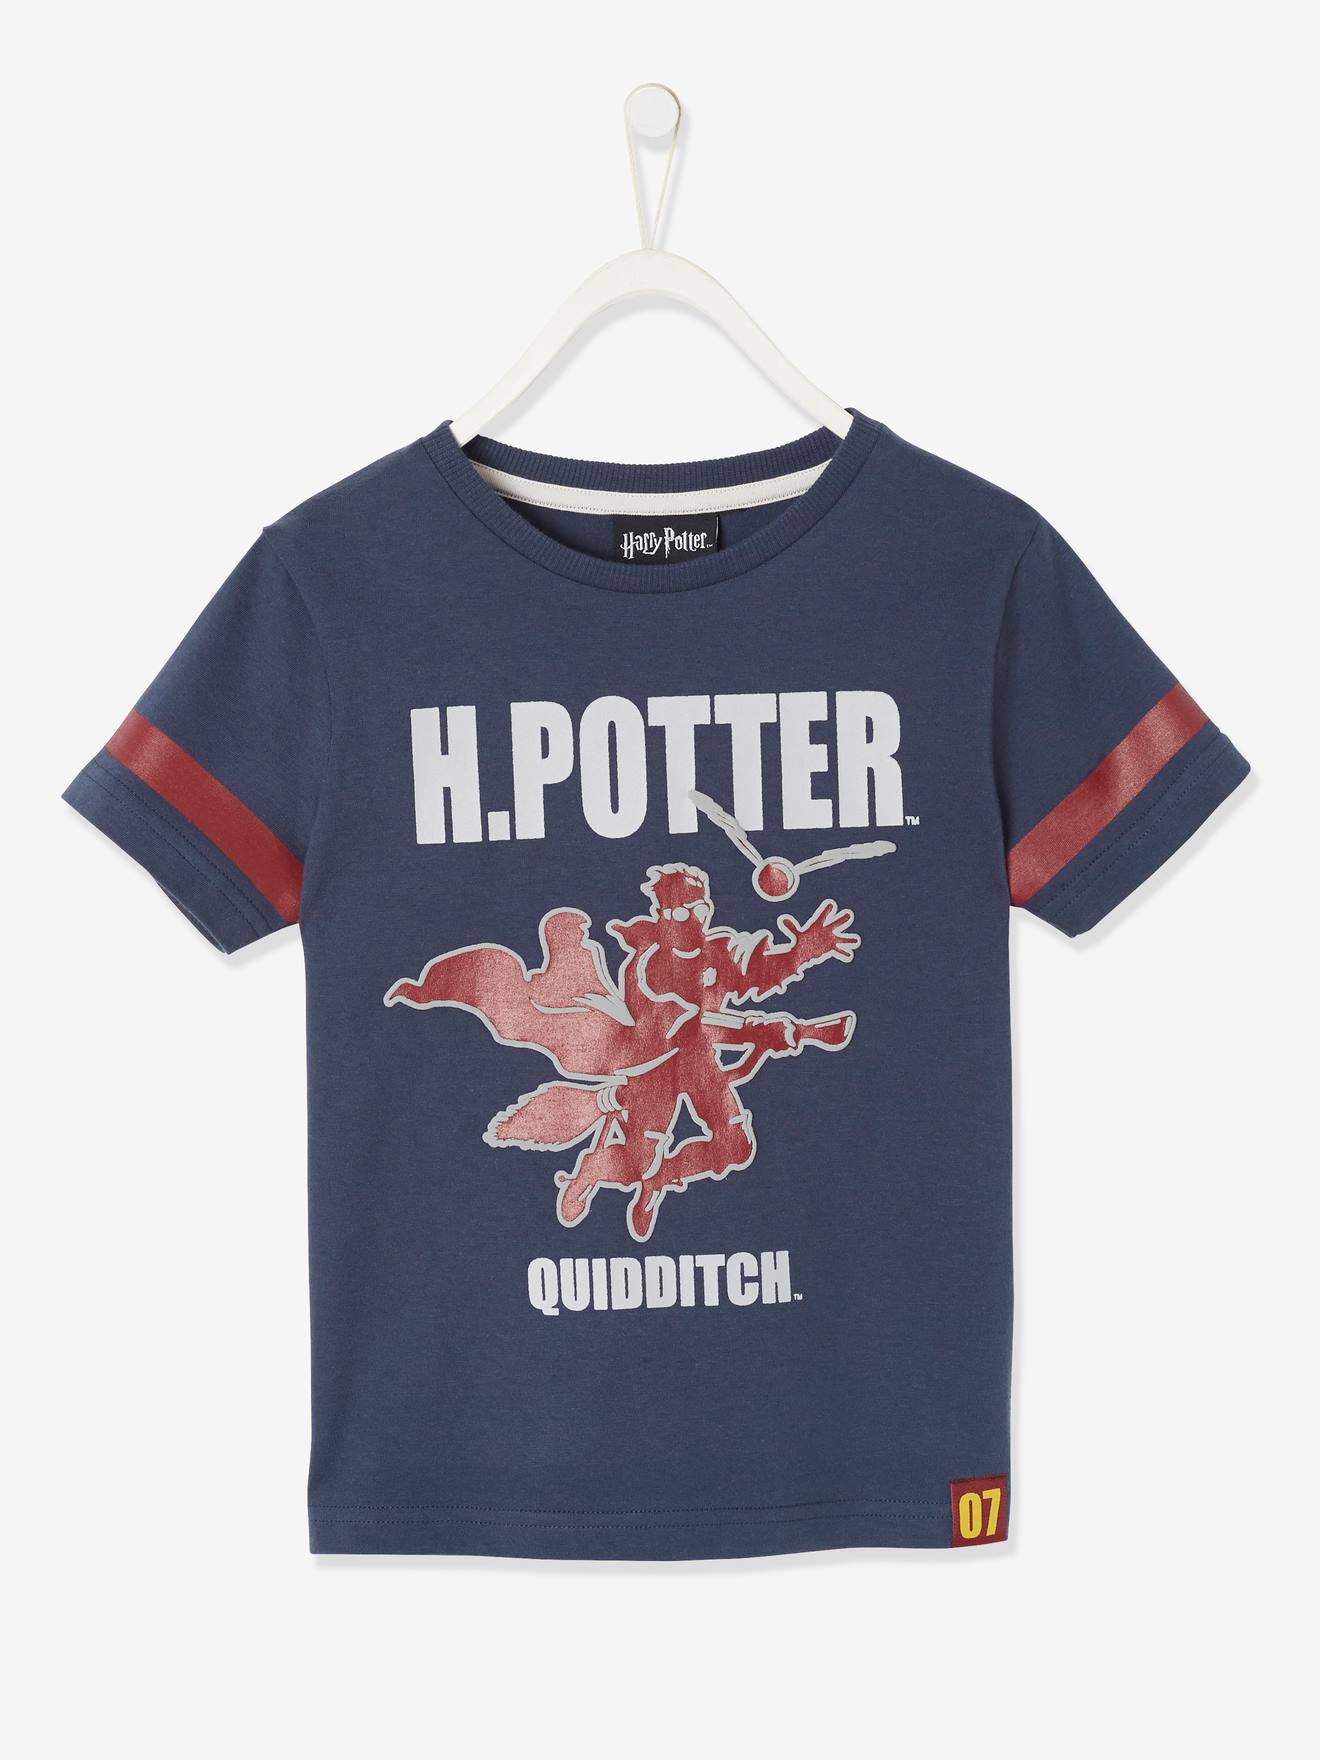 Harry Potter® T Shirt For Boys Blue Dark Solid With Design Boys